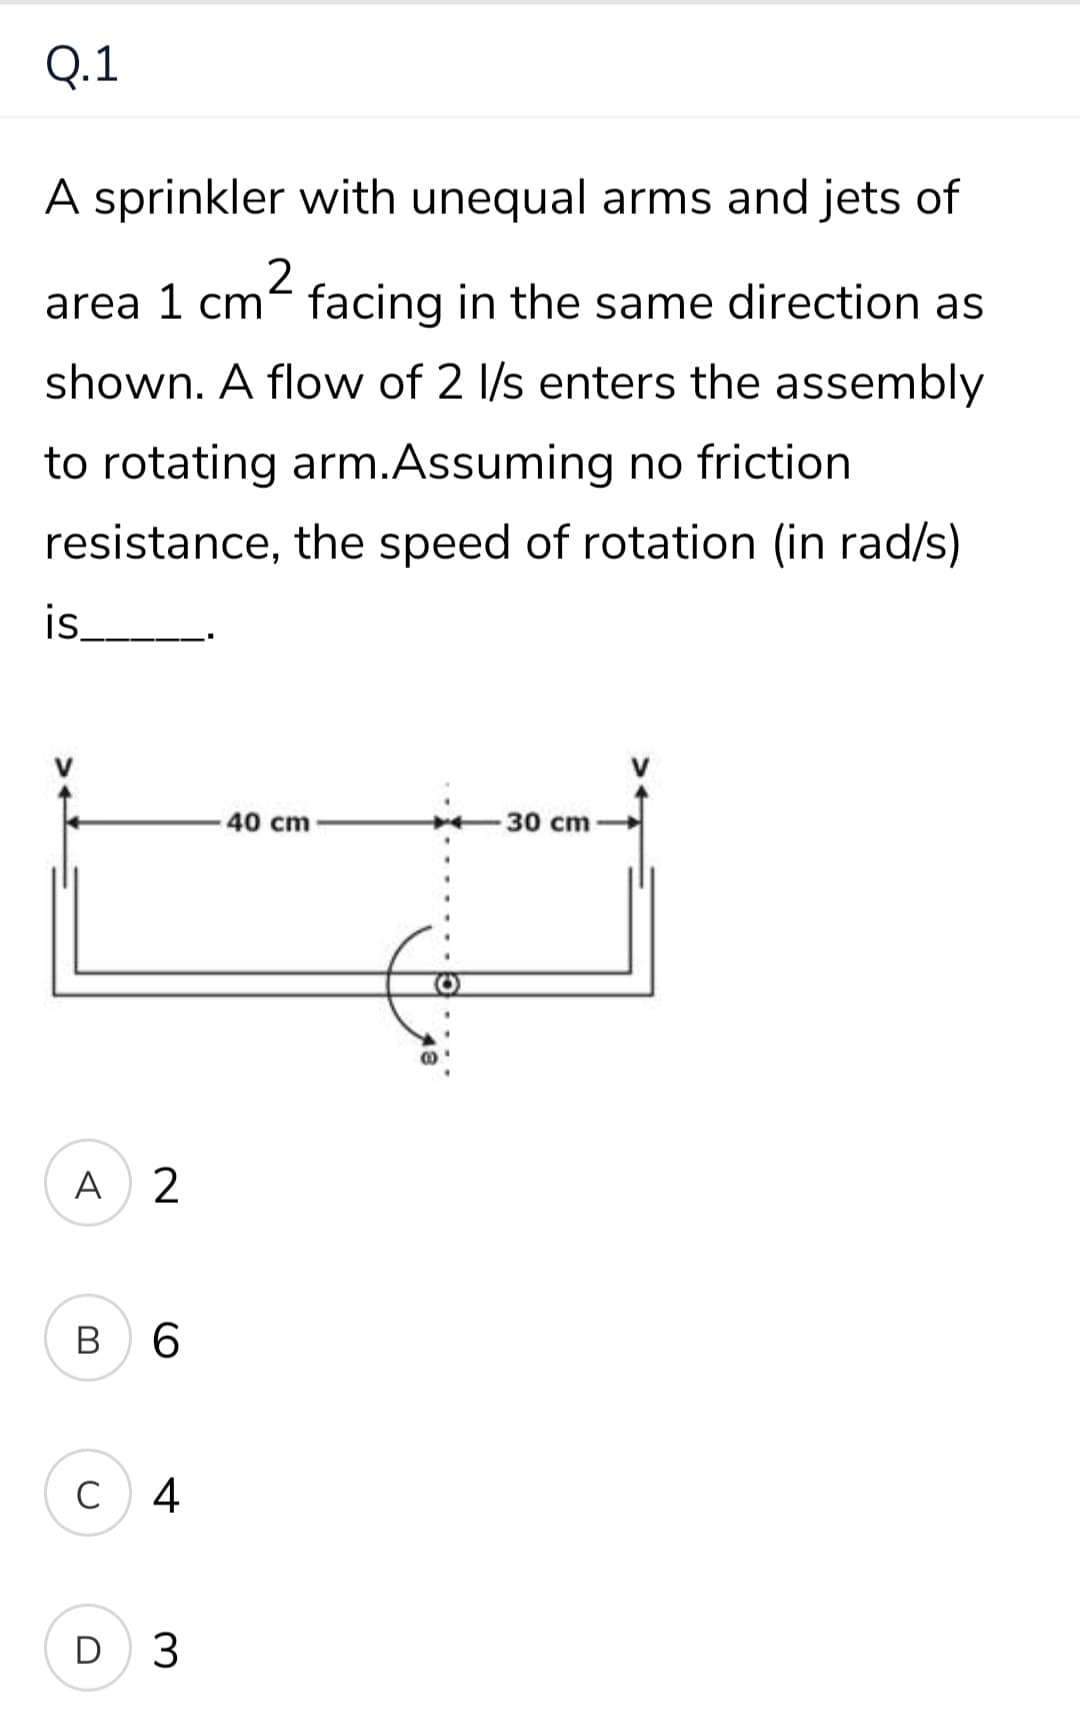 Q.1
A sprinkler with unequal arms and jets of
area 1 cm² facing in the same direction as
shown. A flow of 2 l/s enters the assembly
to rotating arm.Assuming no friction
resistance, the speed of rotation (in rad/s)
is.
40 cm
30 cm
A) 2
B
6.
C
4
D 3
